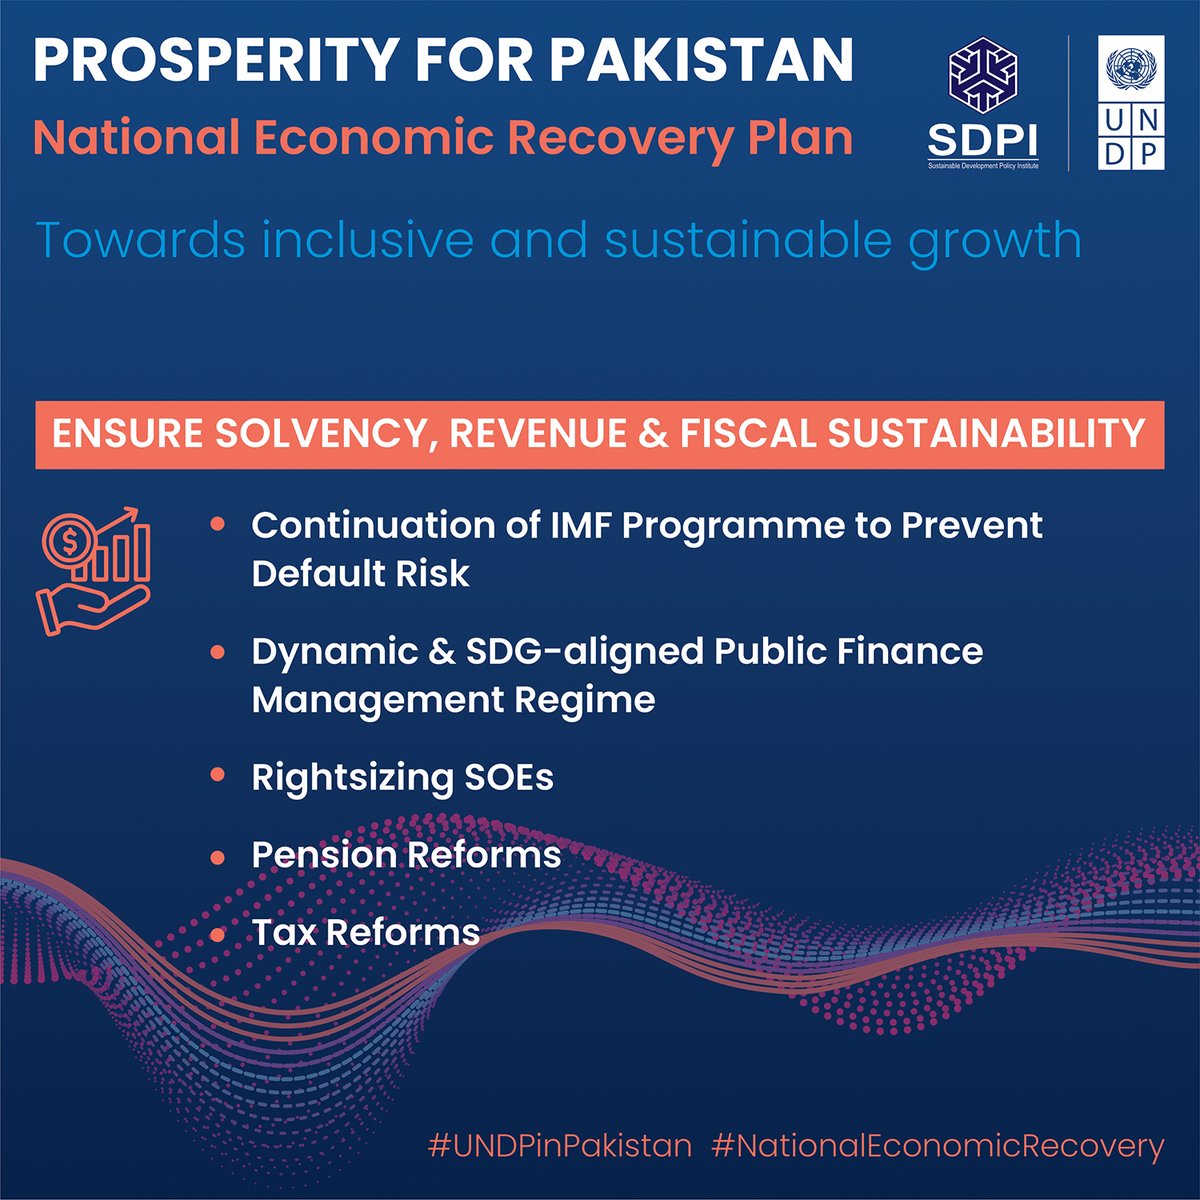 As part of our #ProsperityforPakistan initiative, #UNDPinPakistan & @SDPIPakistan, together with our High-Level Policy Advisory Committee Members, present a proposed National Economic Recovery Plan for Pakistan ➡️#TowardsSustainableandInclusiveGrowth Pillar I: Ensure solvency,…